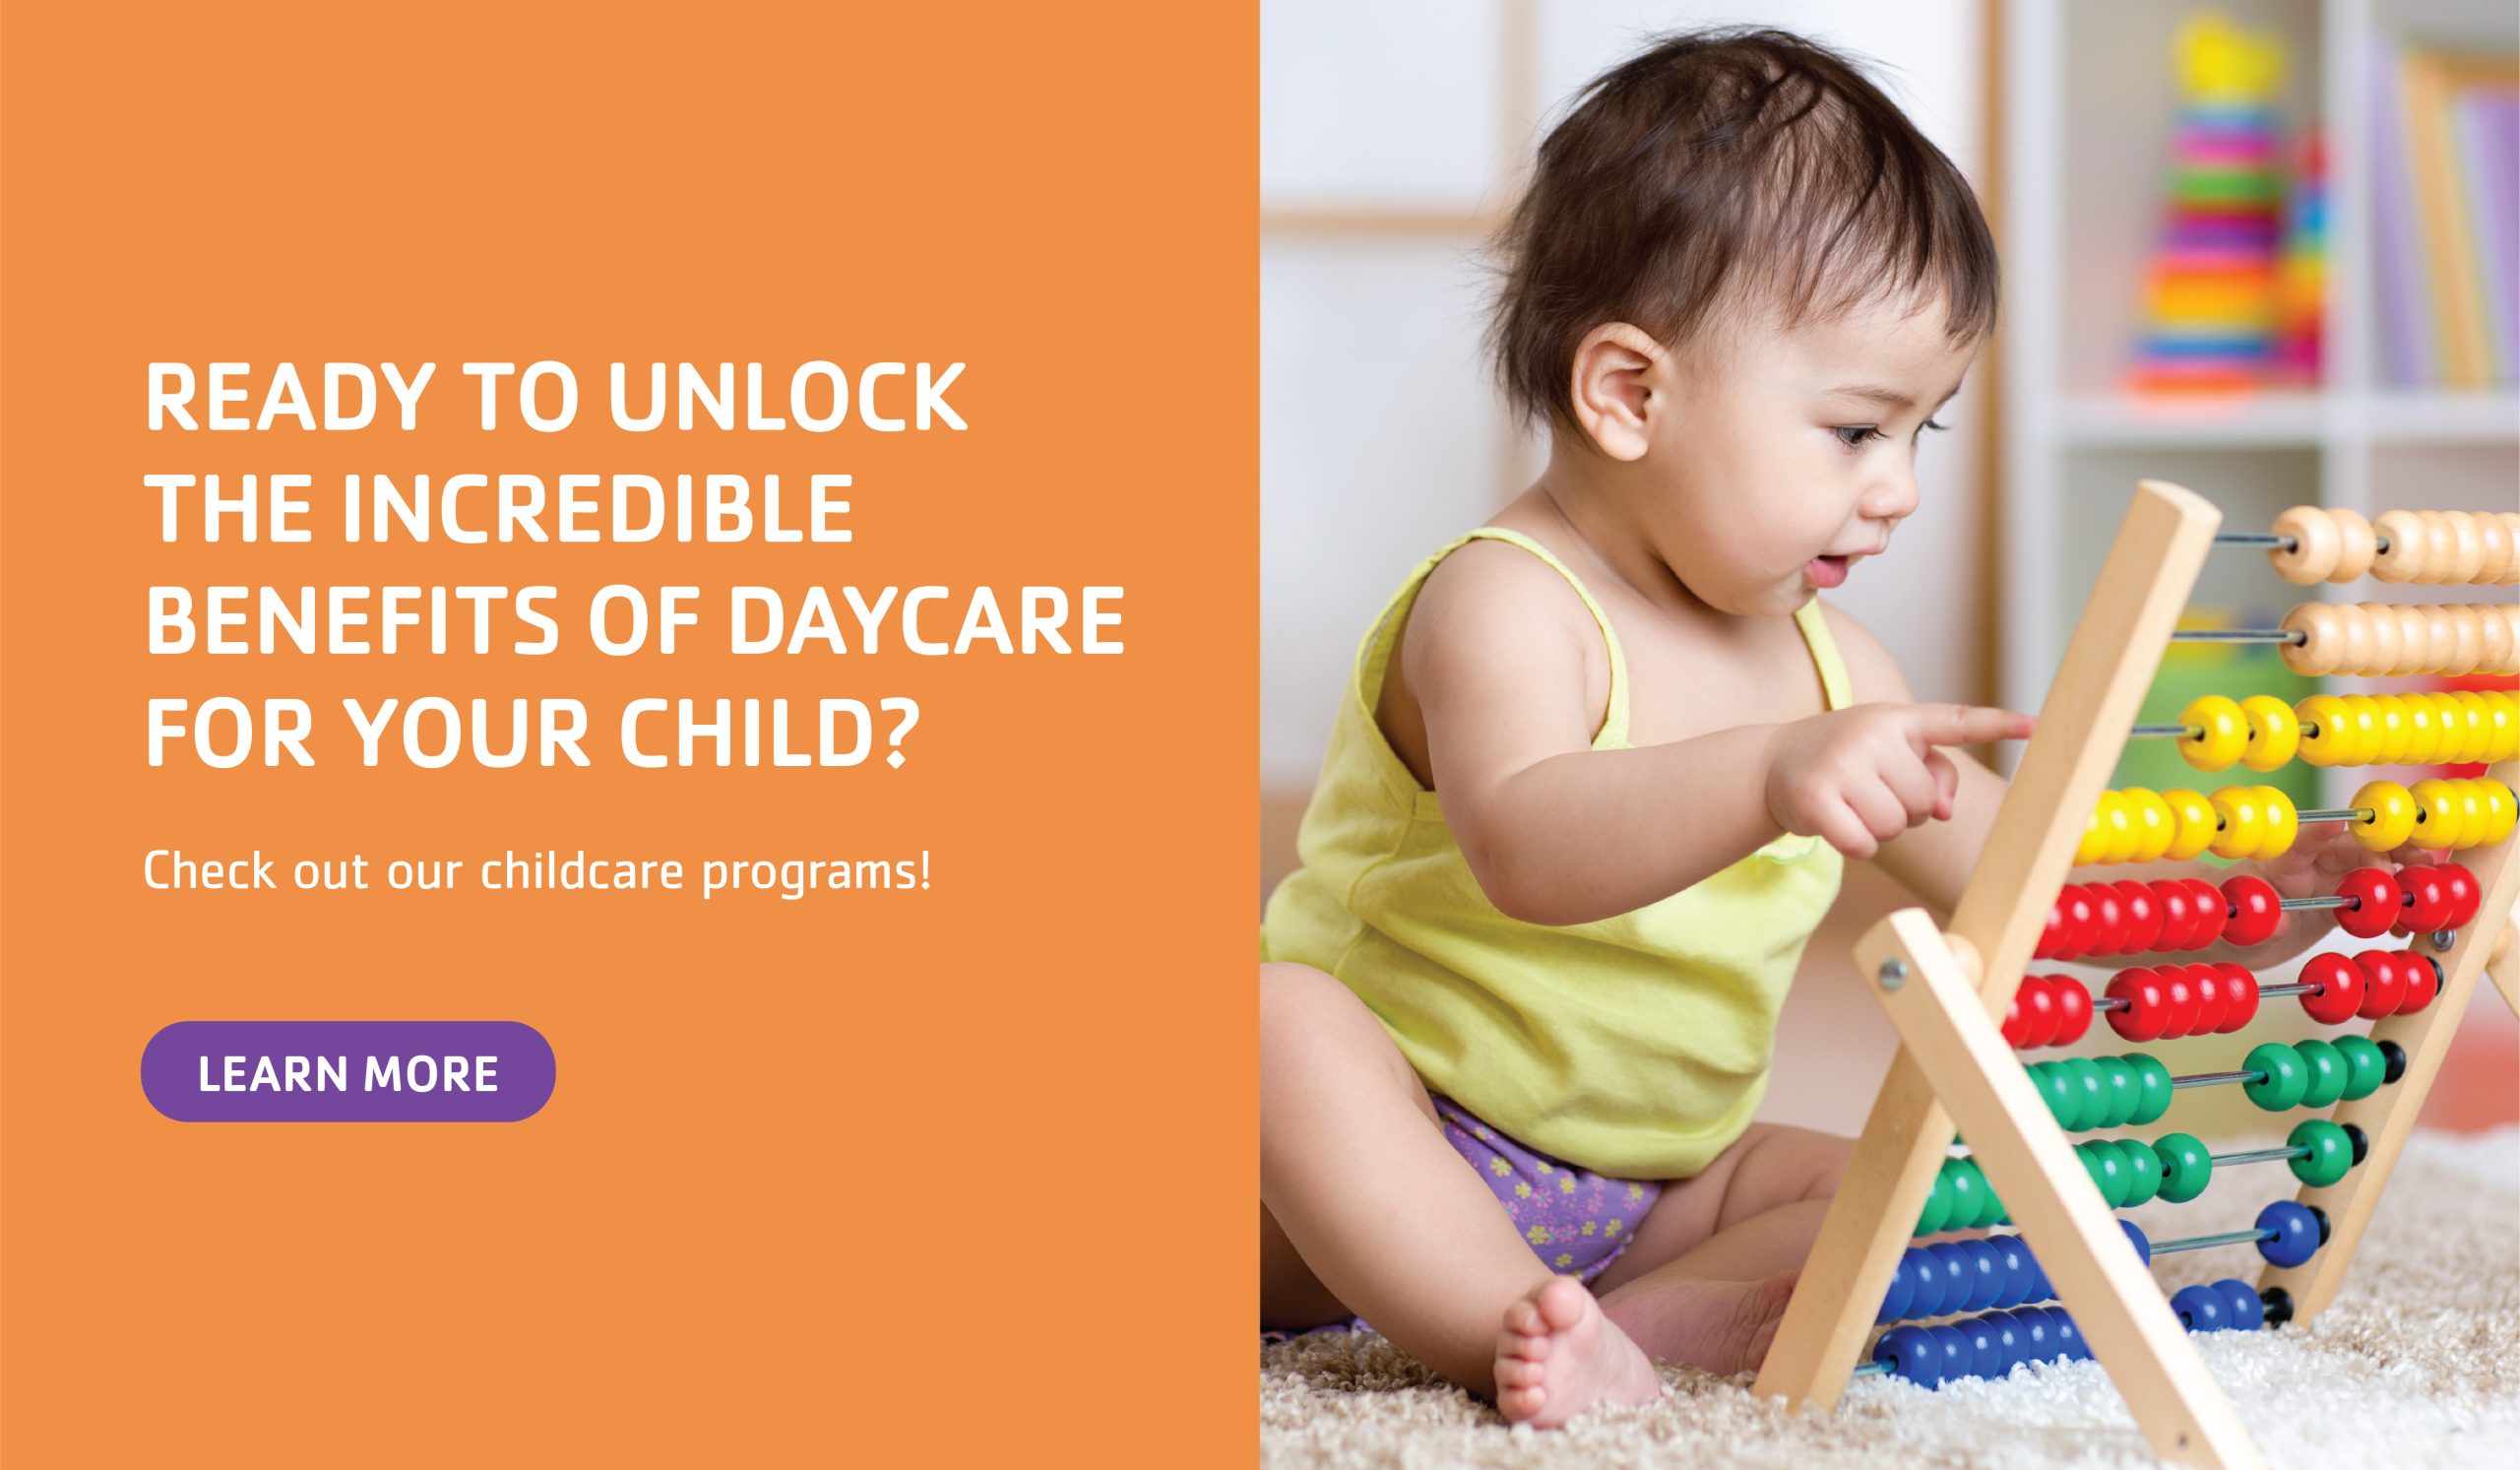 Unlock the incredible benefits of daycare for your child!